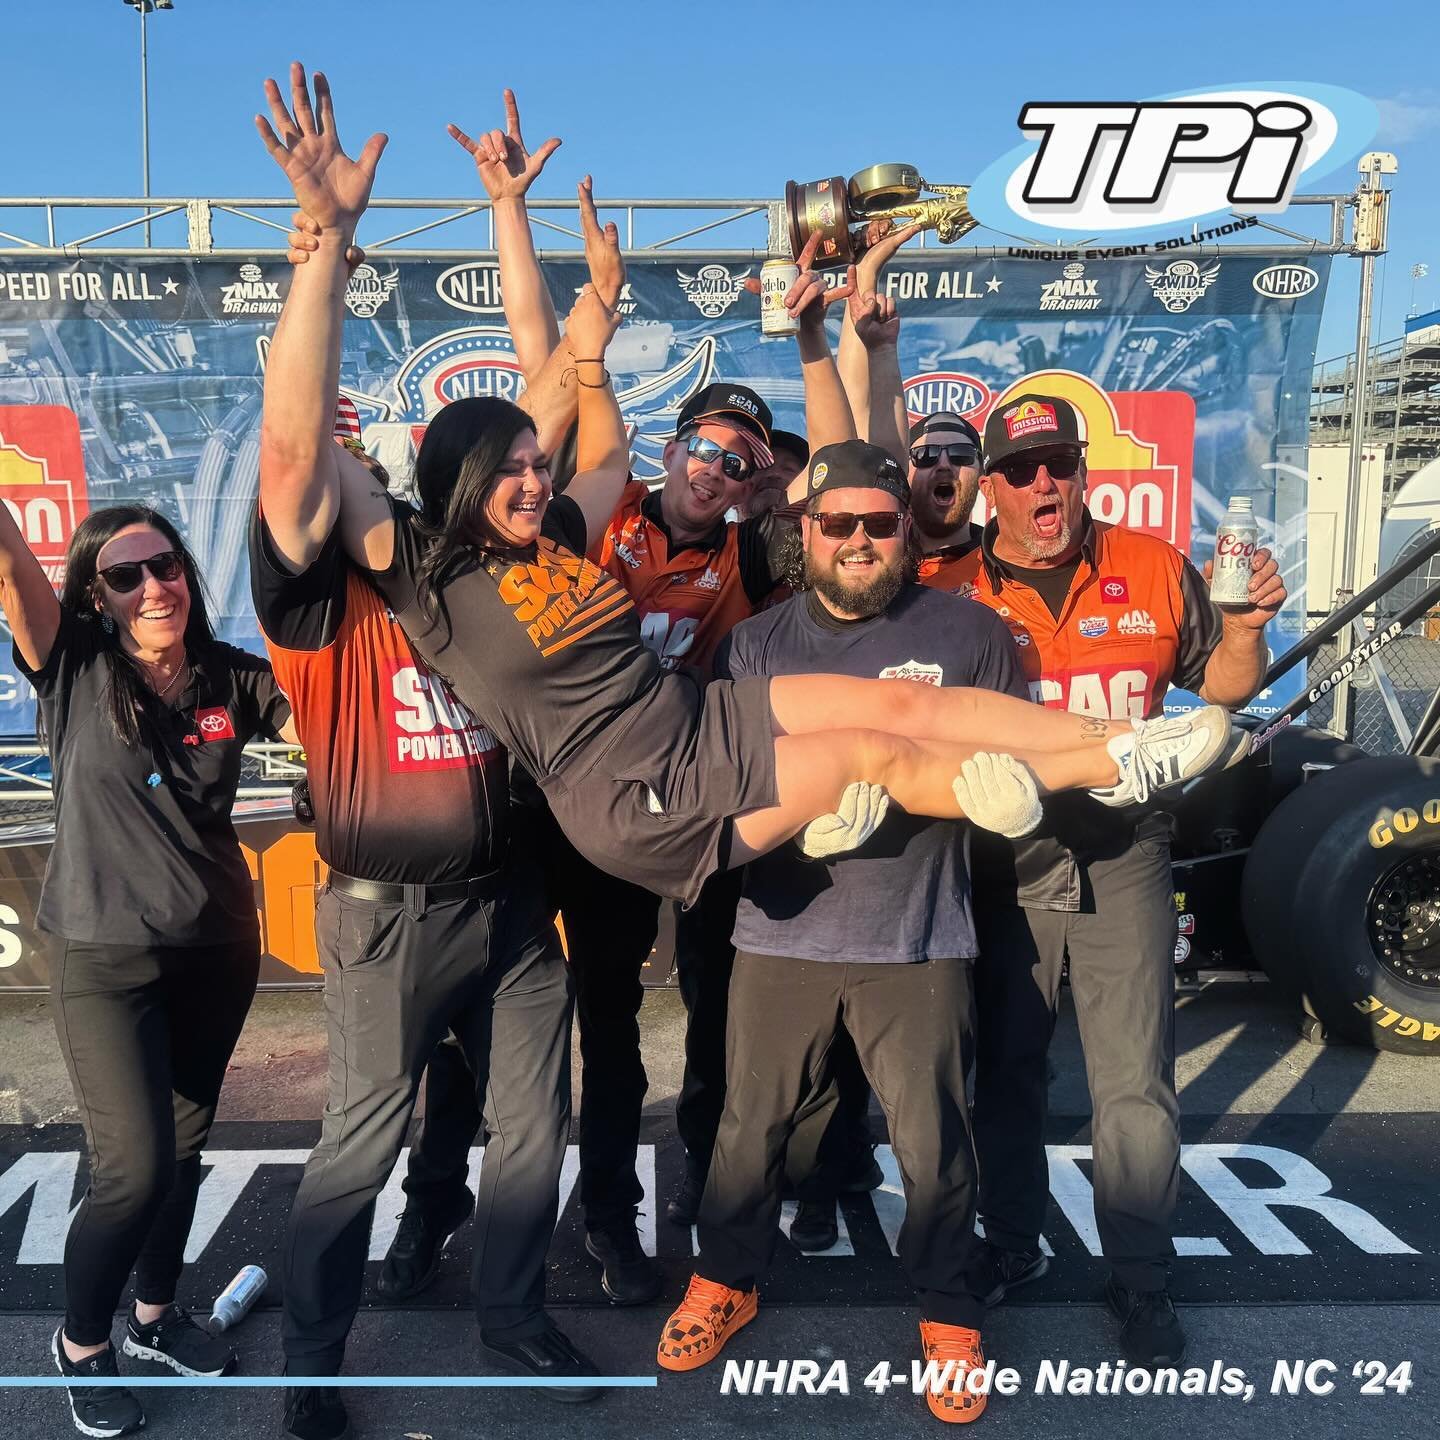 #tbt #throwbackthursday 
Official submission to change the name to 
: NHR-Yay 👀?!

Yes, No? Well, regardless we have a blast either way. NHRA 4-Wide Nationals in Concord NC was one for the books and the trophy shelf! 

Congrats to the challenge winn